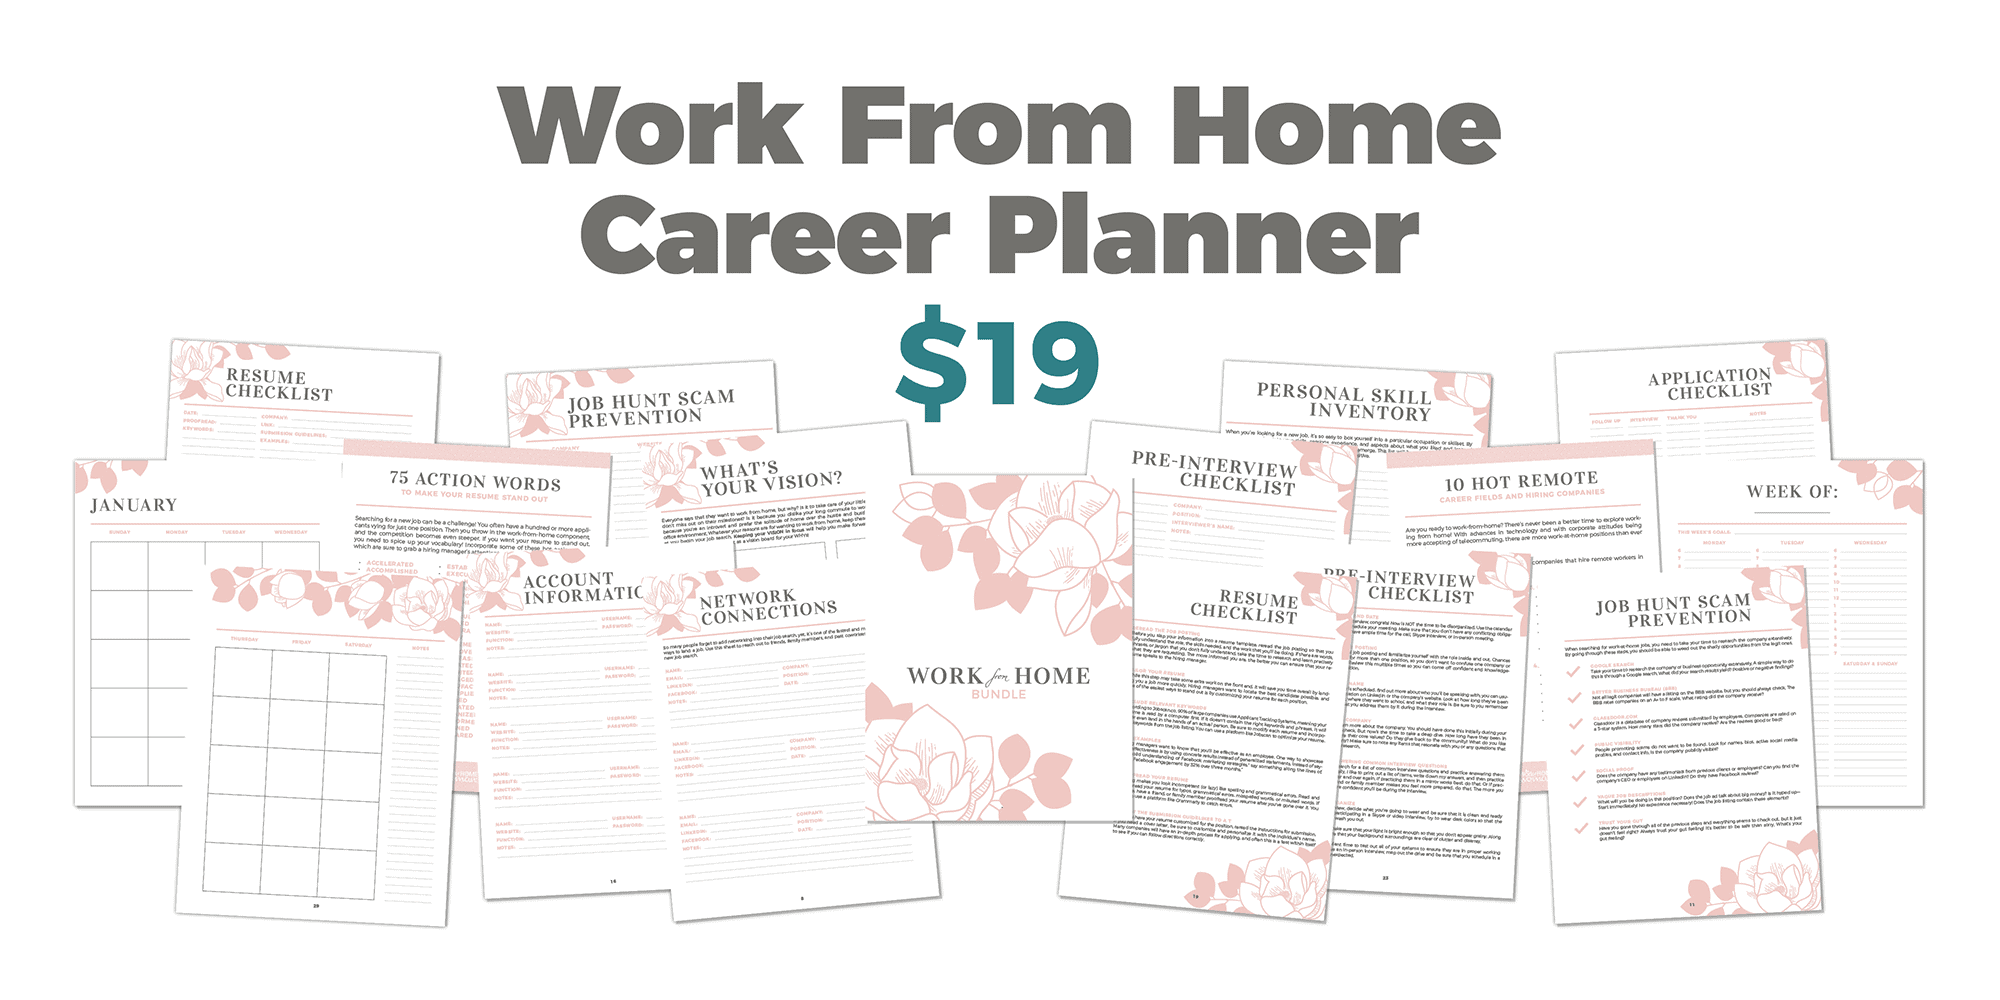 Work From Home Career Planner $19